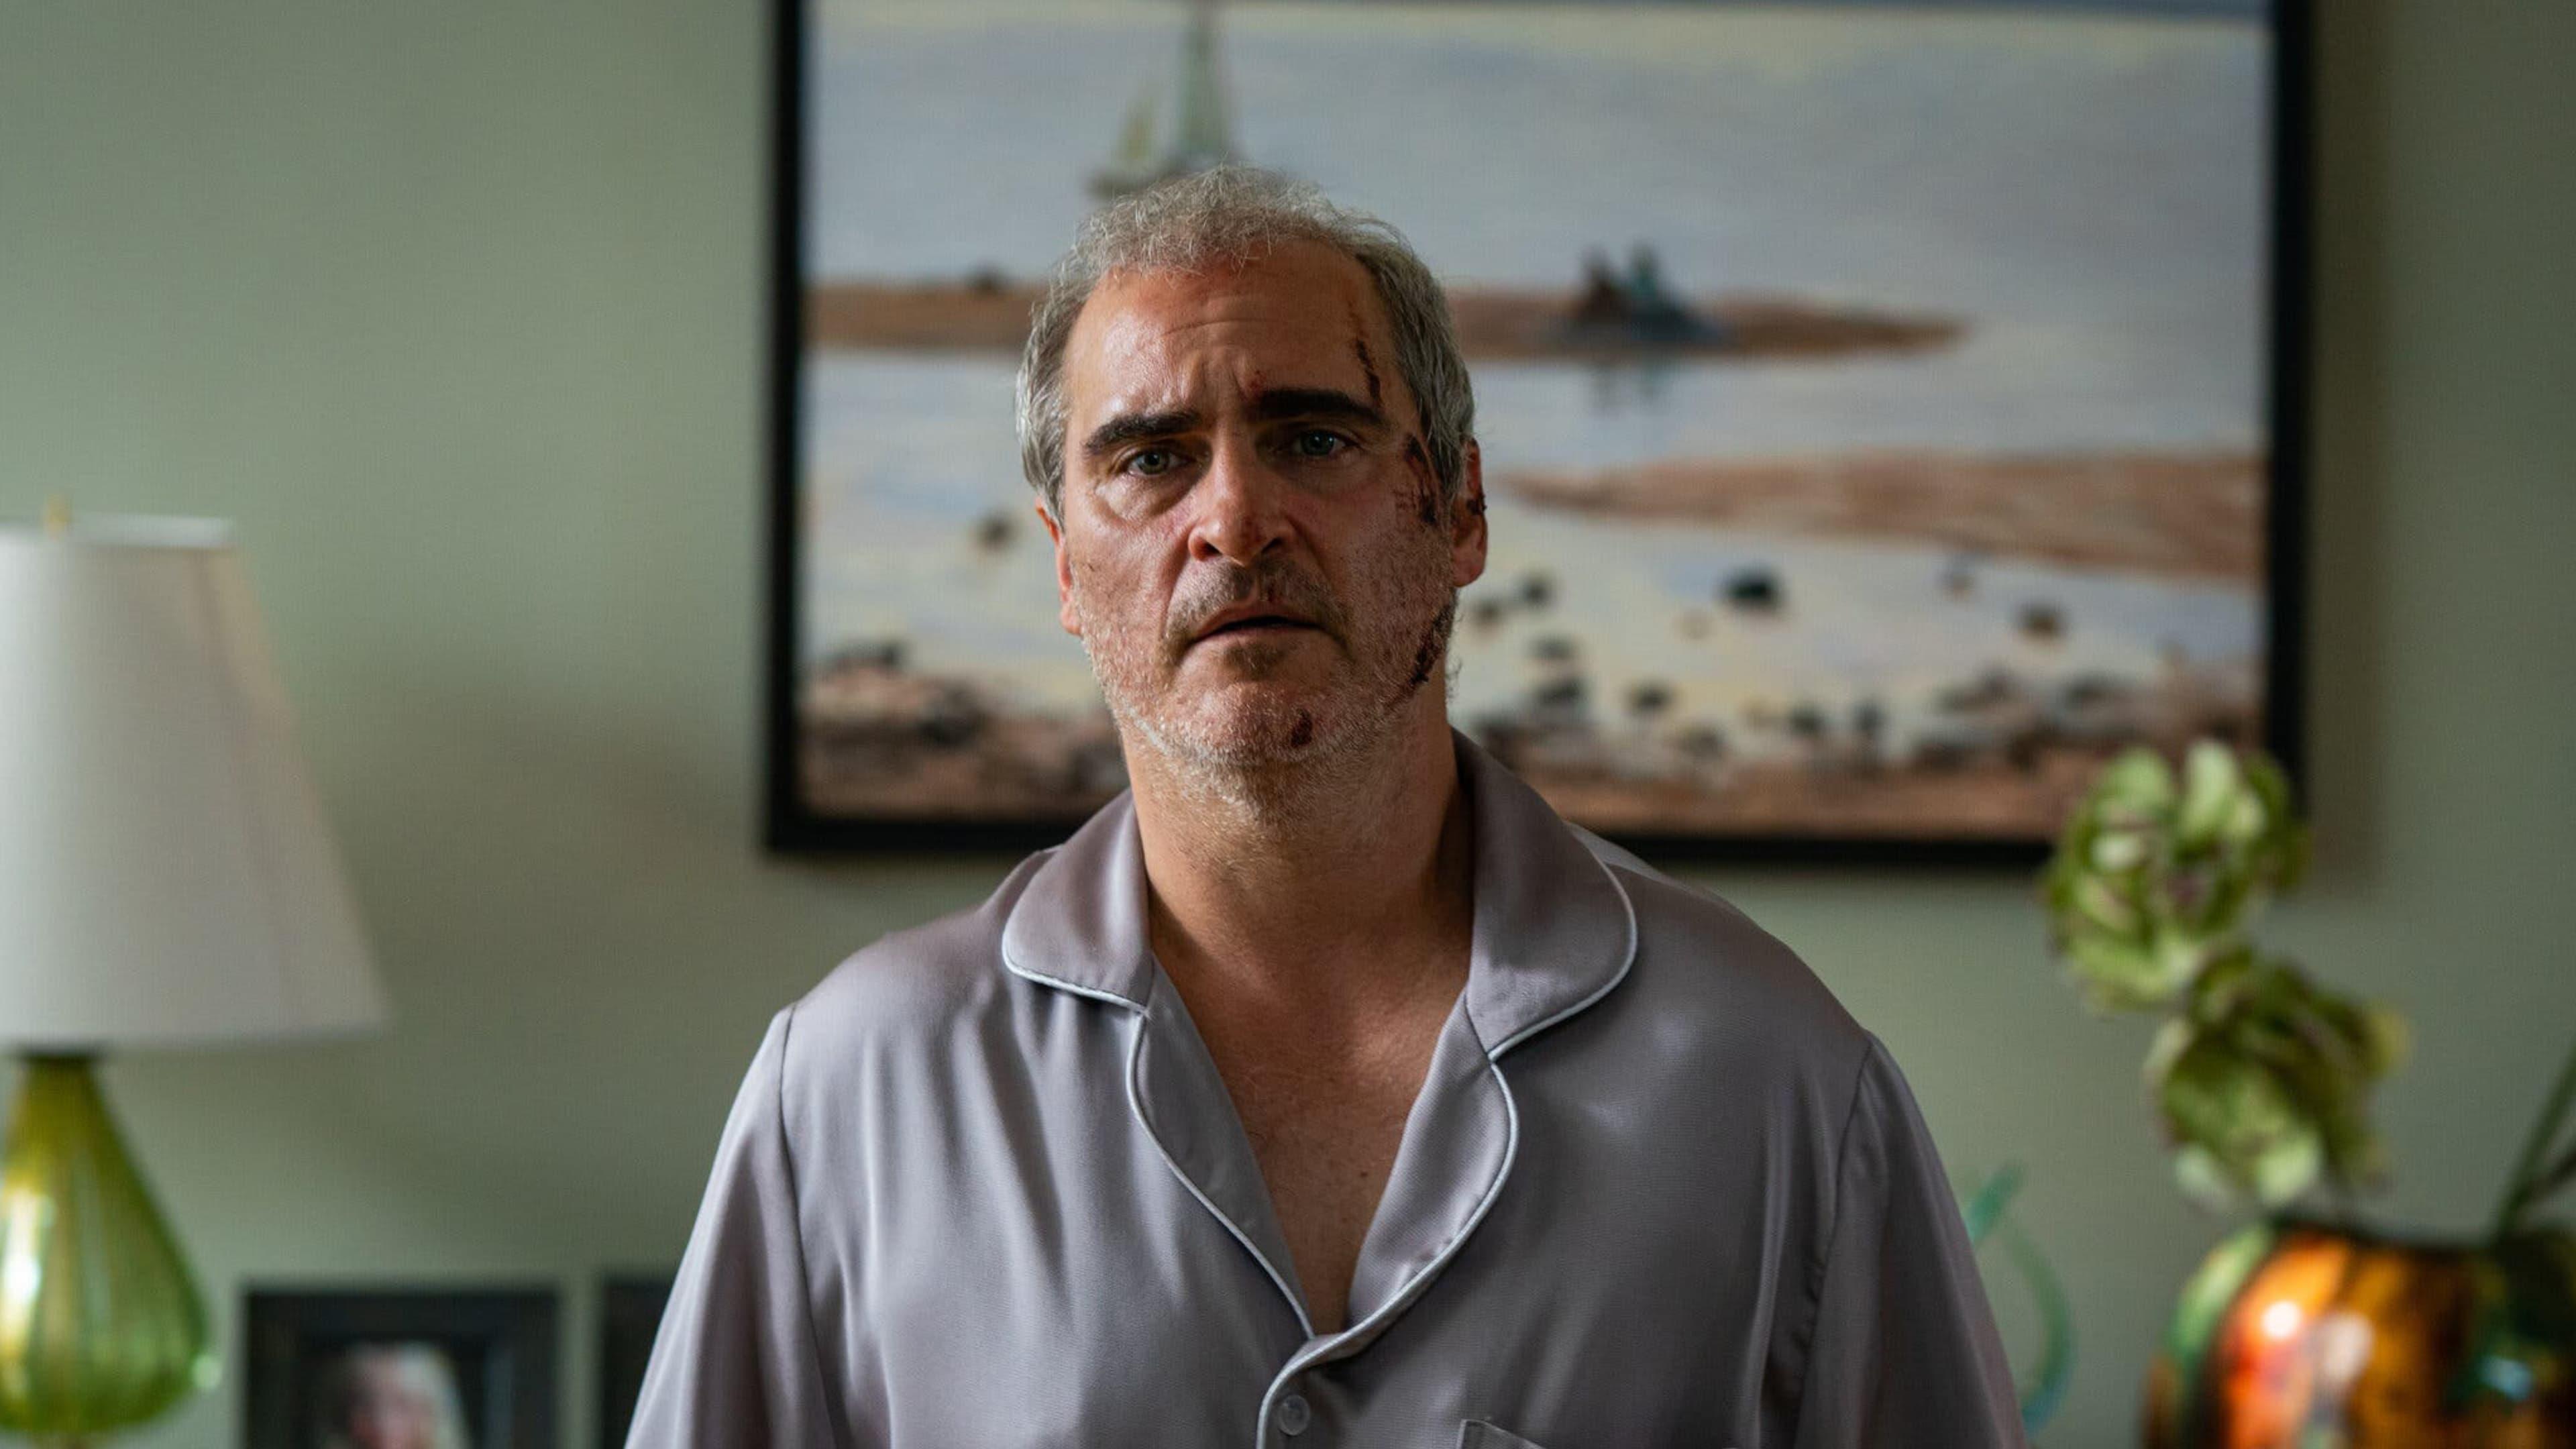 Joaquin Phoenix, battered and bruised, stares blankly at the viewer.